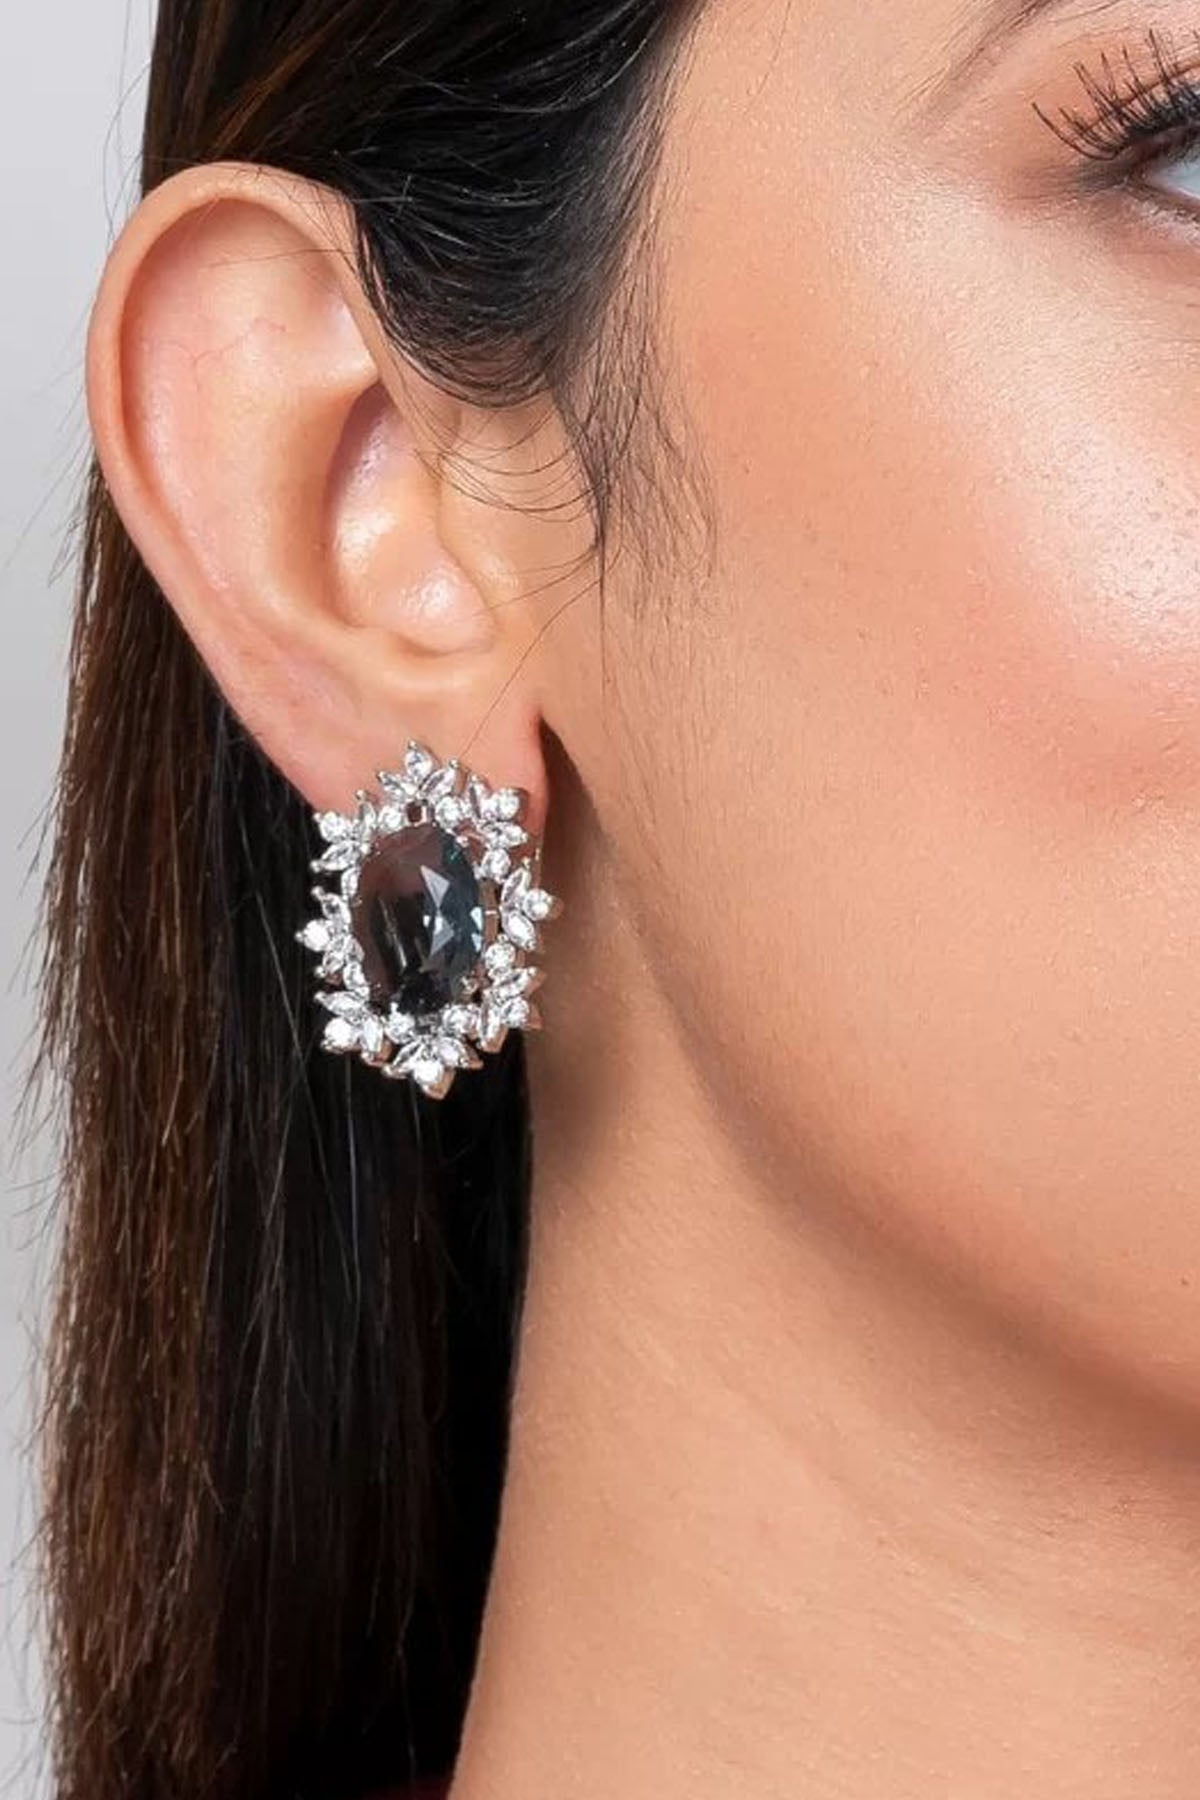 Black Oval Diamond Earrings of Brand Putstyle Available online at ScrollnShops